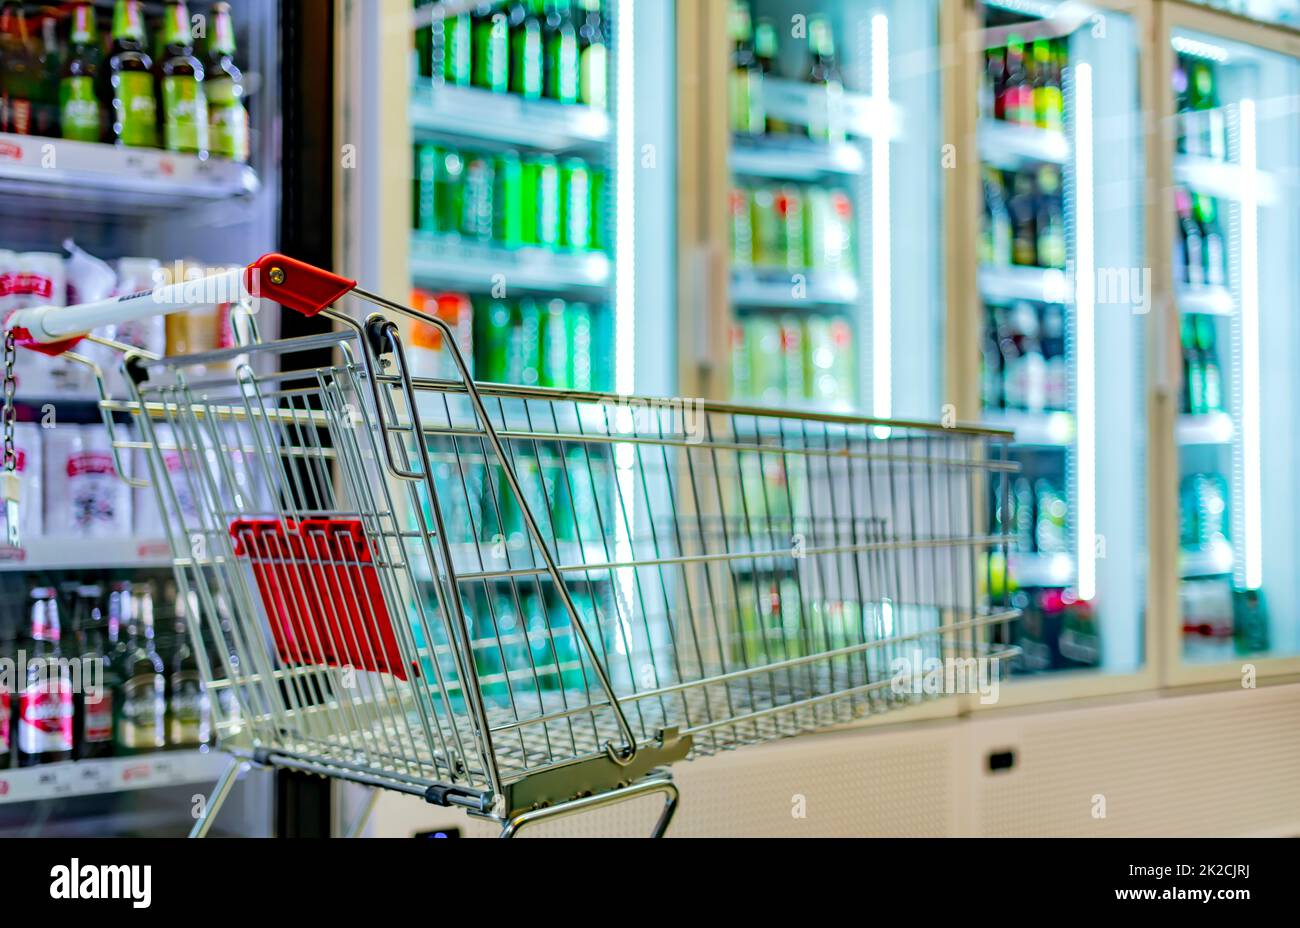 A shopping cart by a store shelf in a supermarket Stock Photo